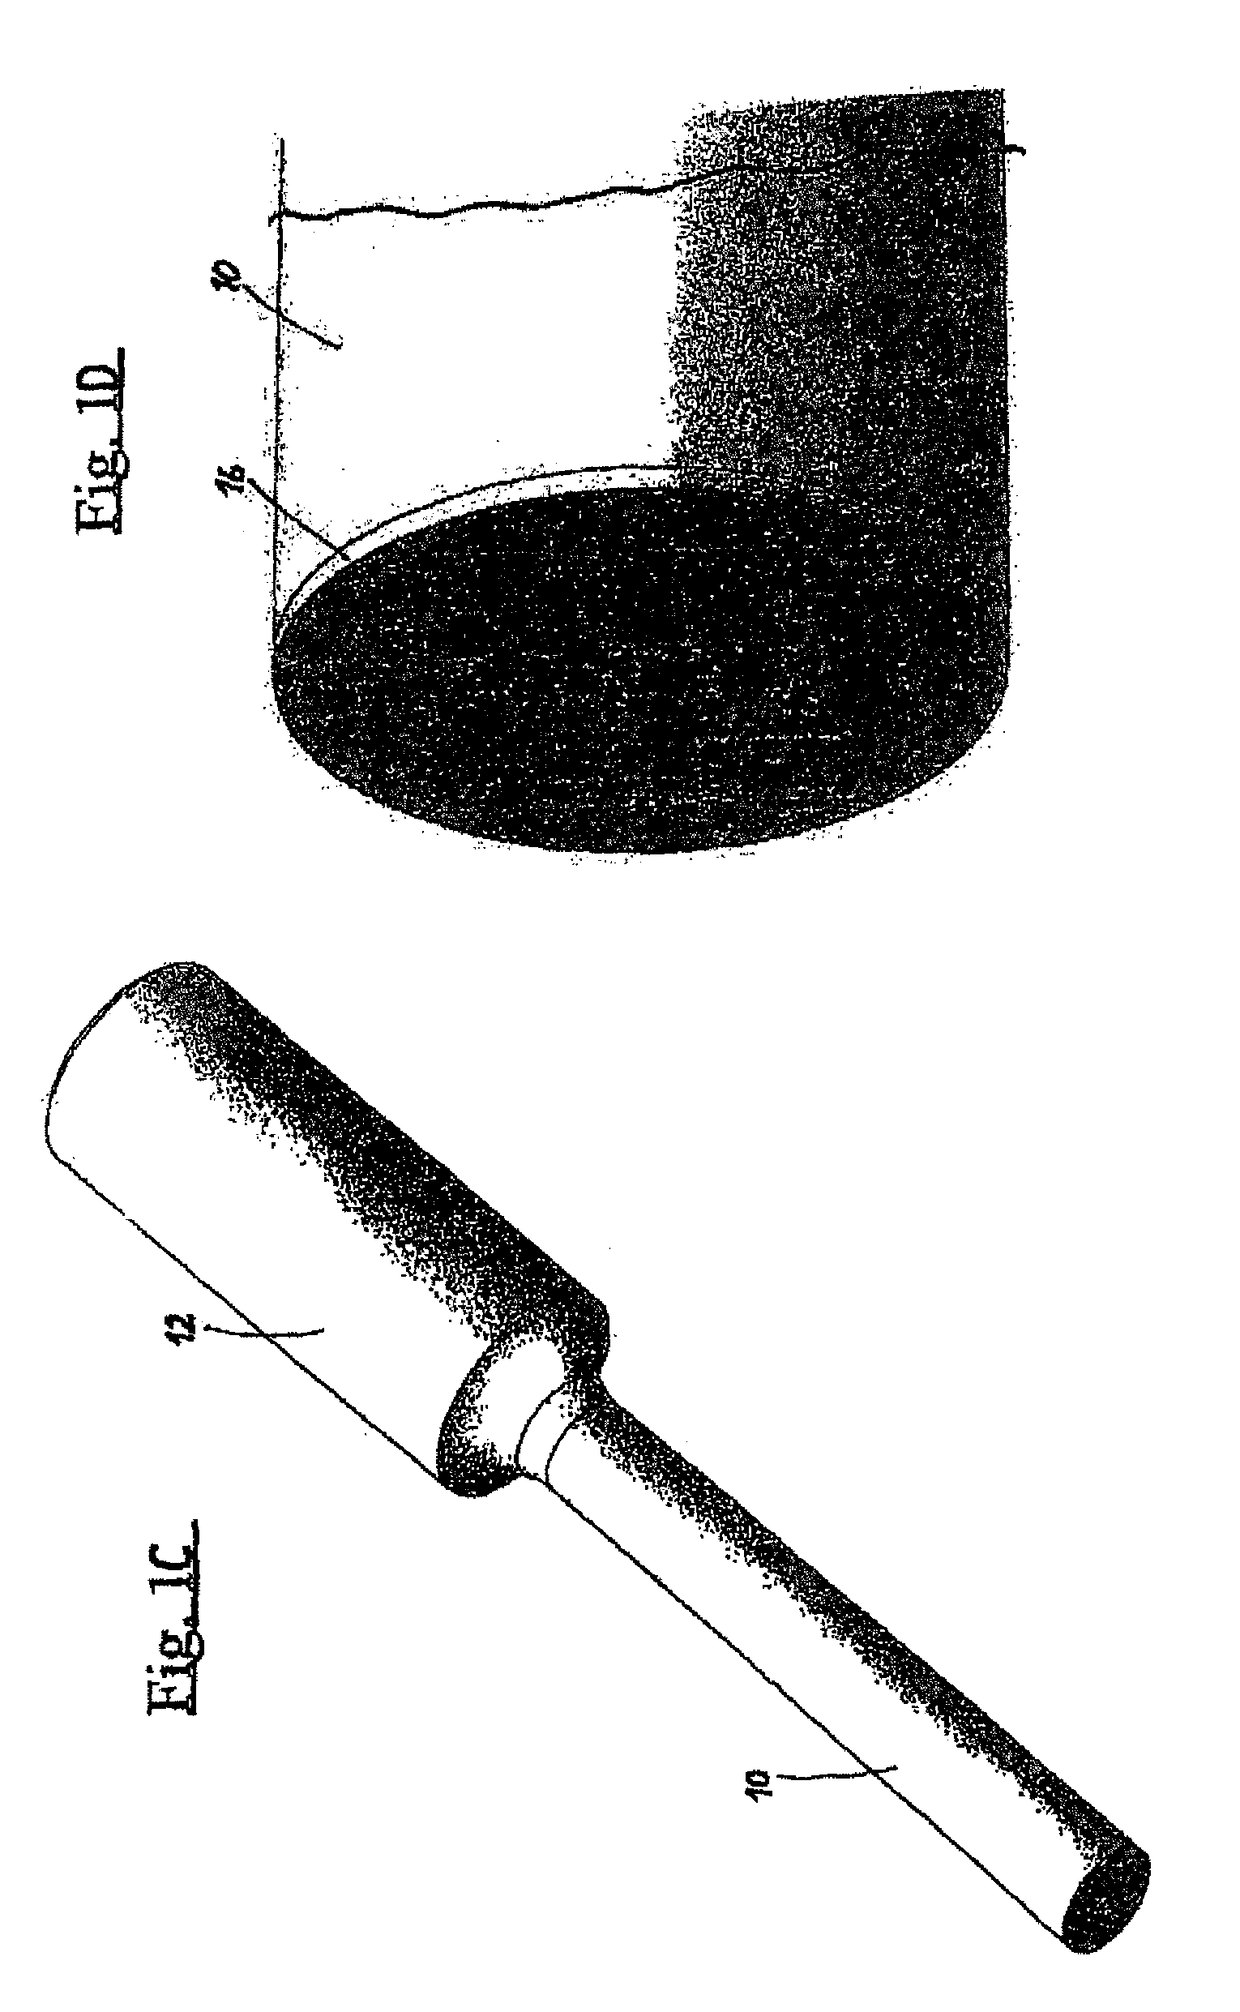 Method and tool for producing an exact-fit cylindrical bore by removal of material from an existing bore with a finishing allowance